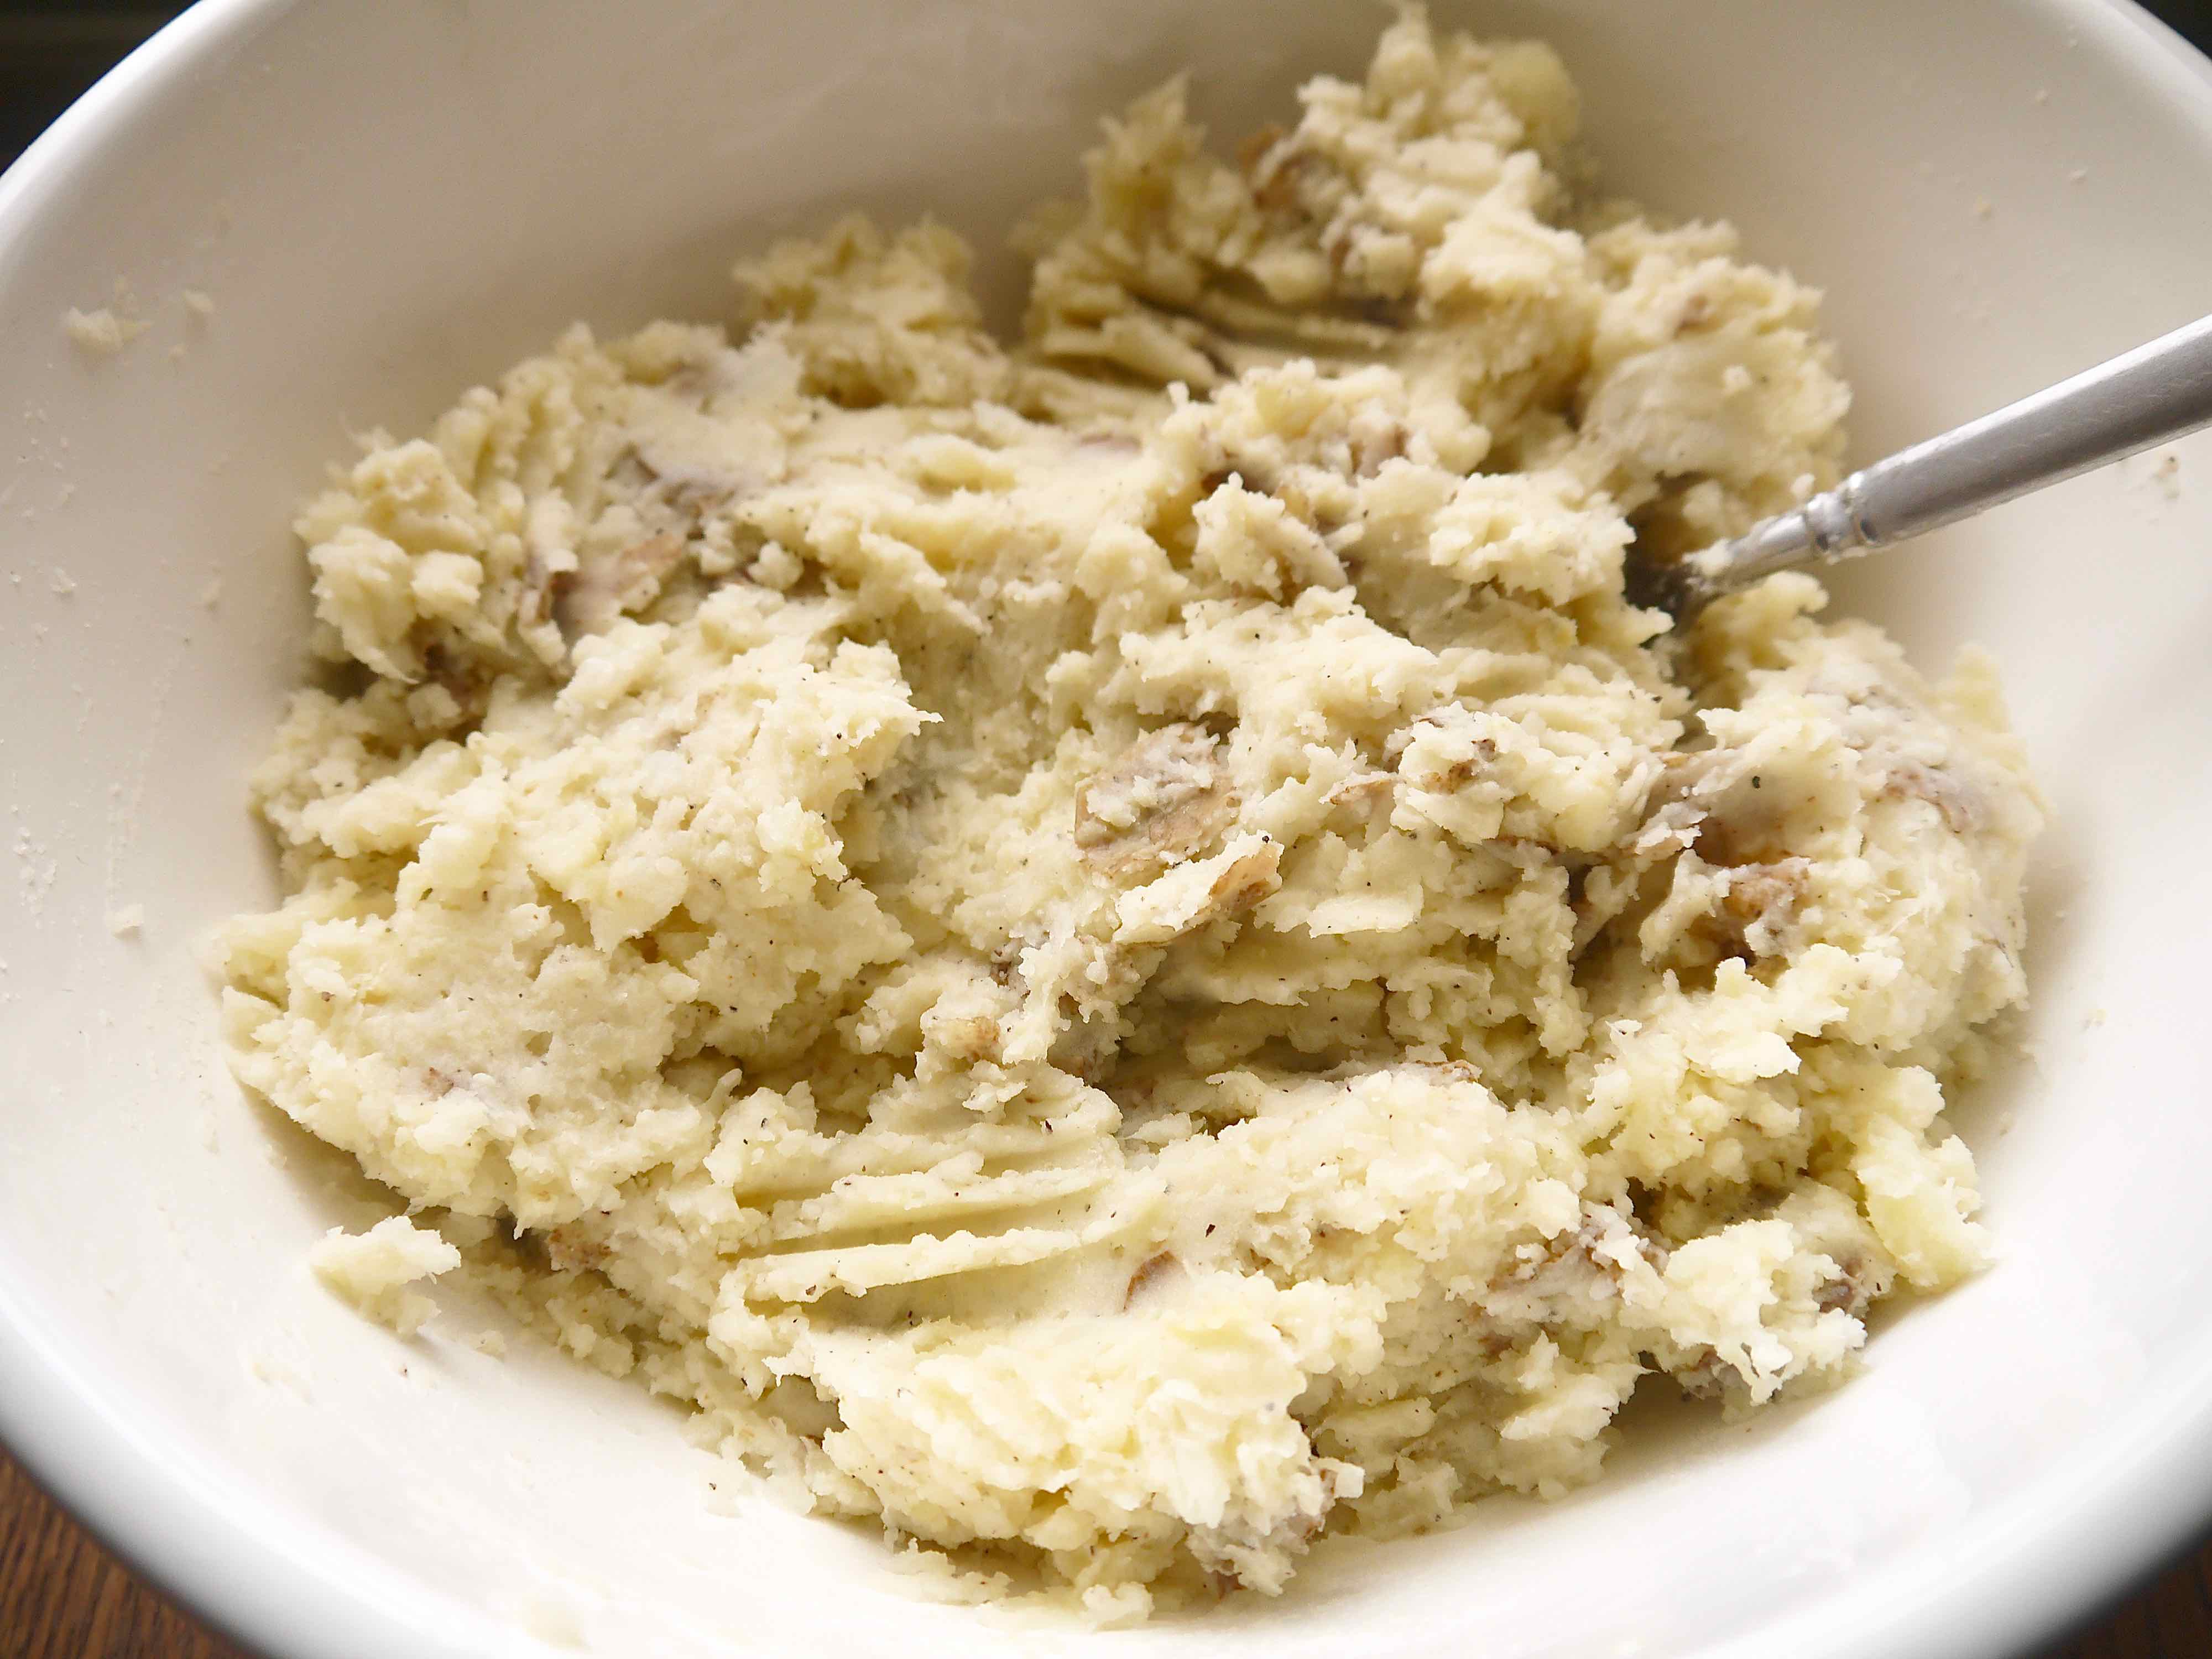 Mashed cauliflower and potatoes in a bowl.